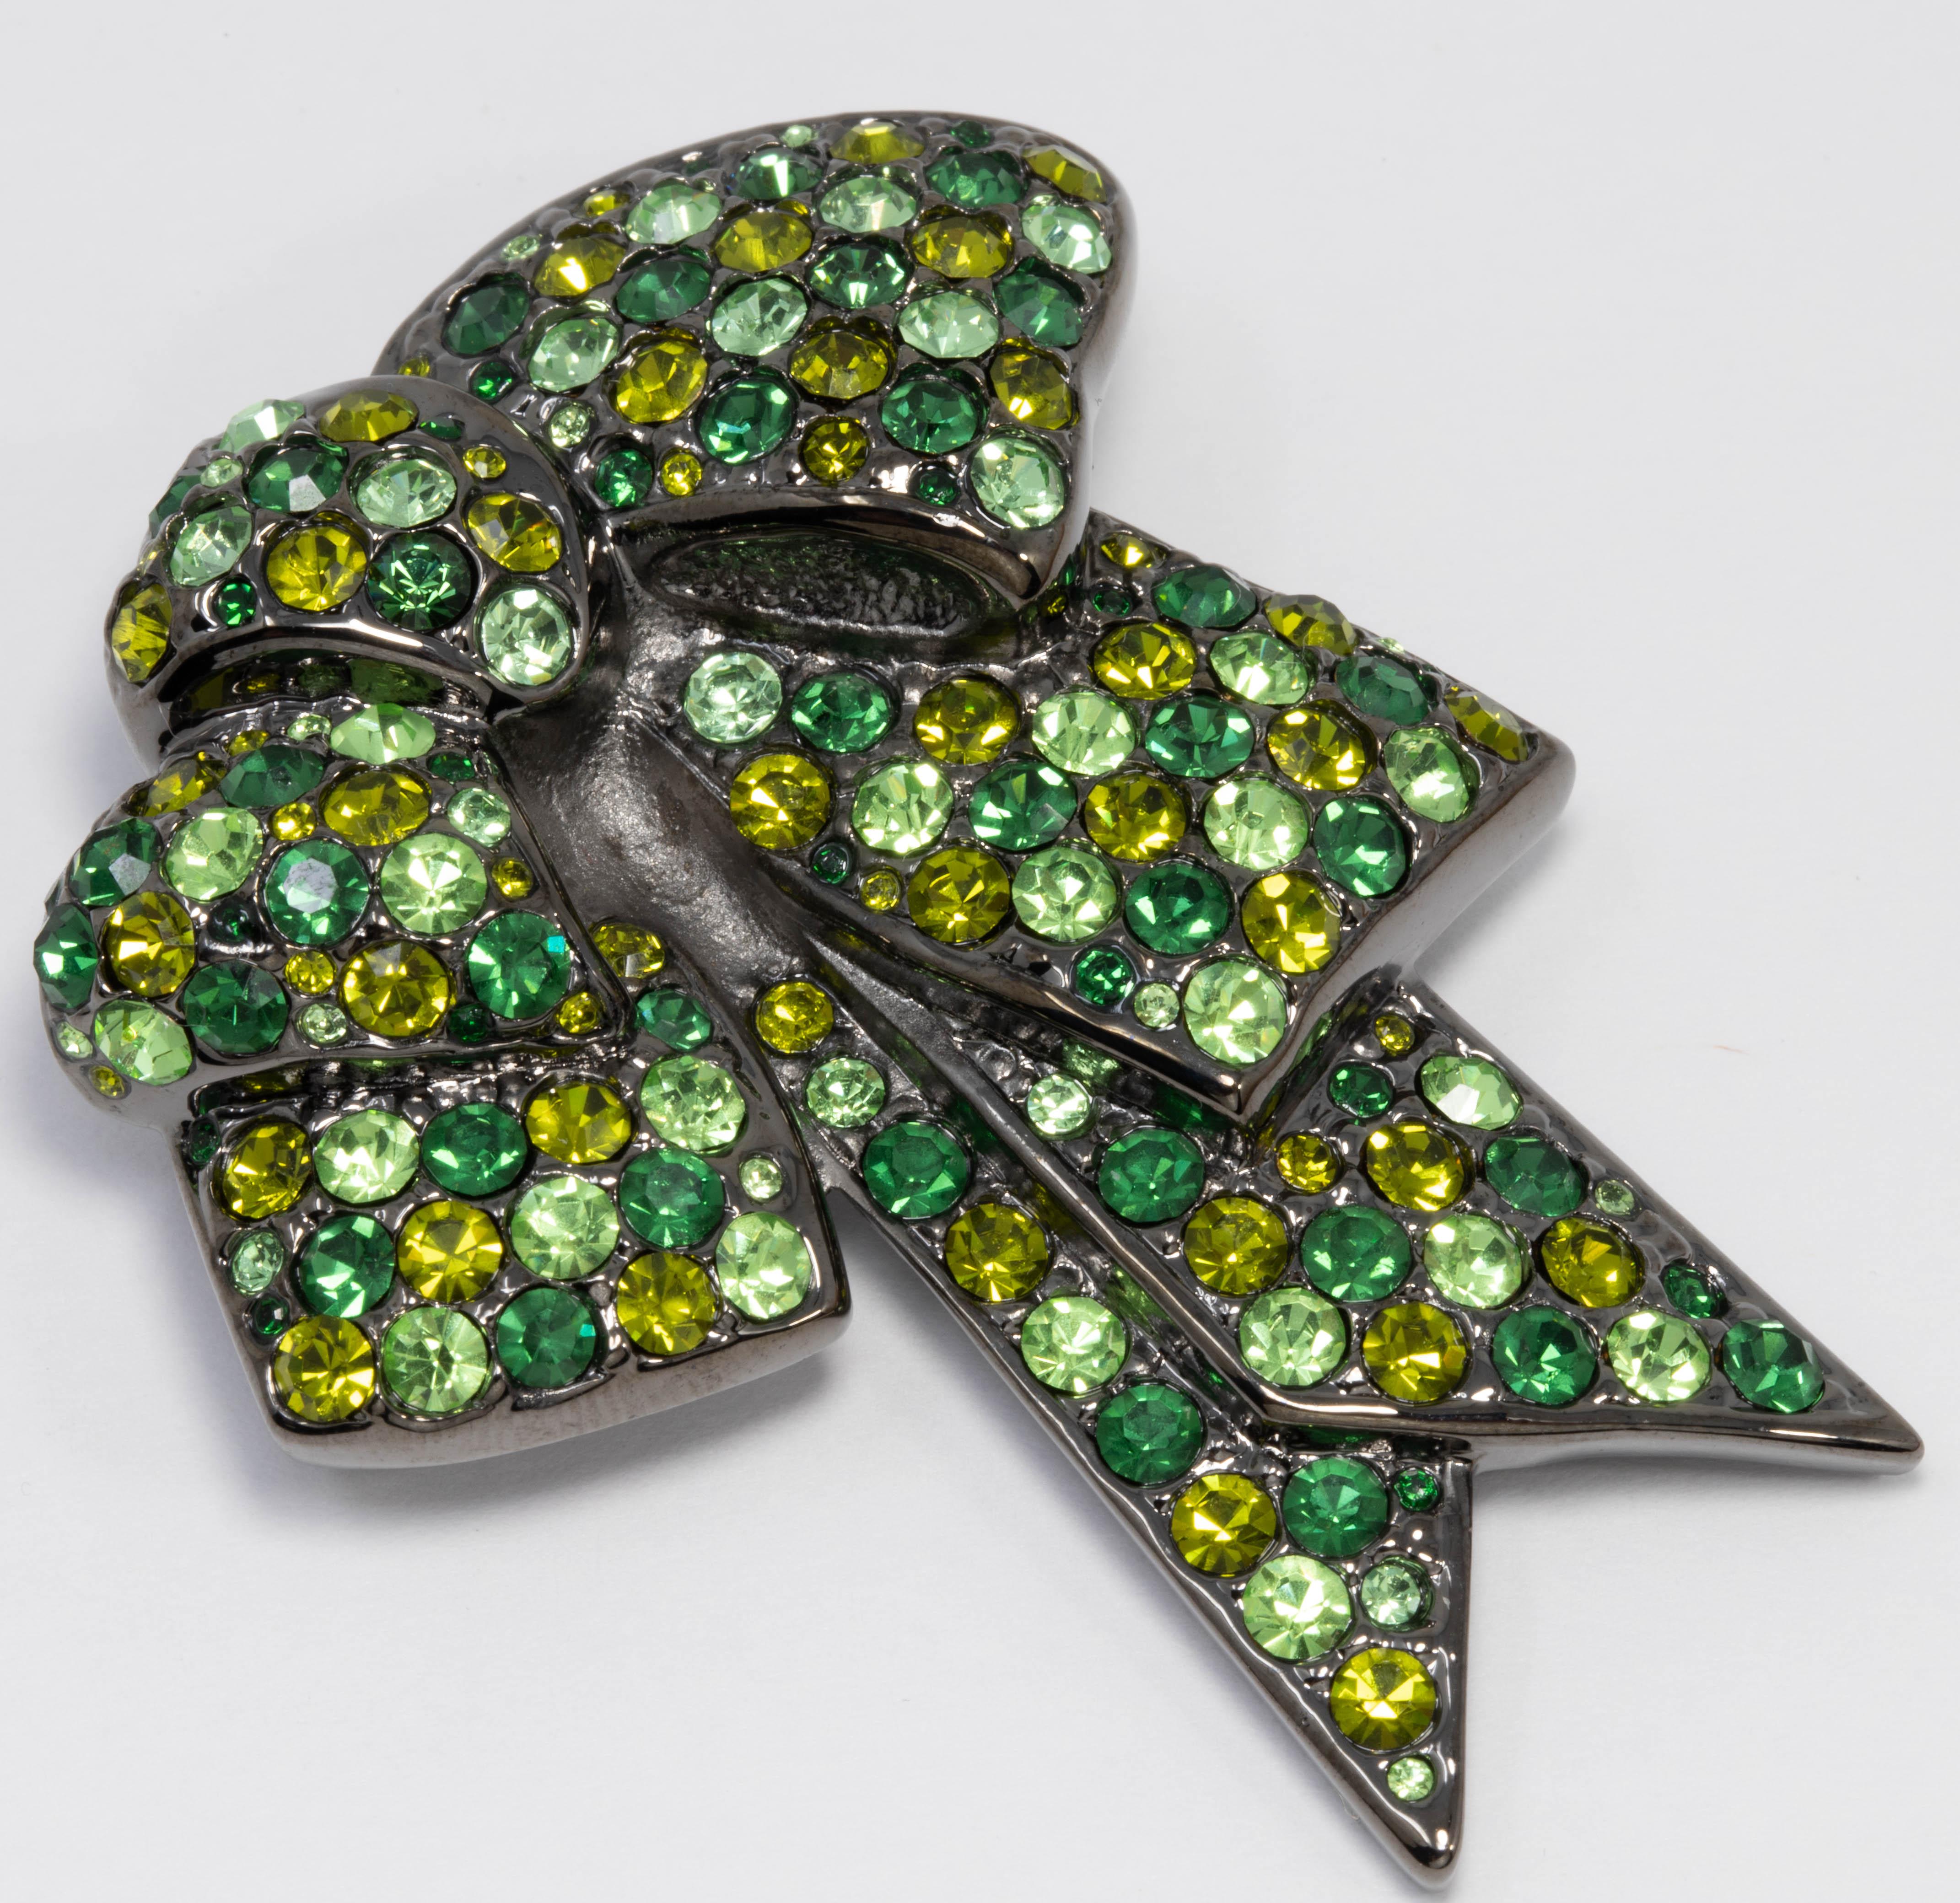 A sophisticated bow pin by Nolan Miller. Glittering green pave crystals are set on a dark gray gunmetal-tone setting.

Tags, Marks, Hallmarks: Nolan Miller